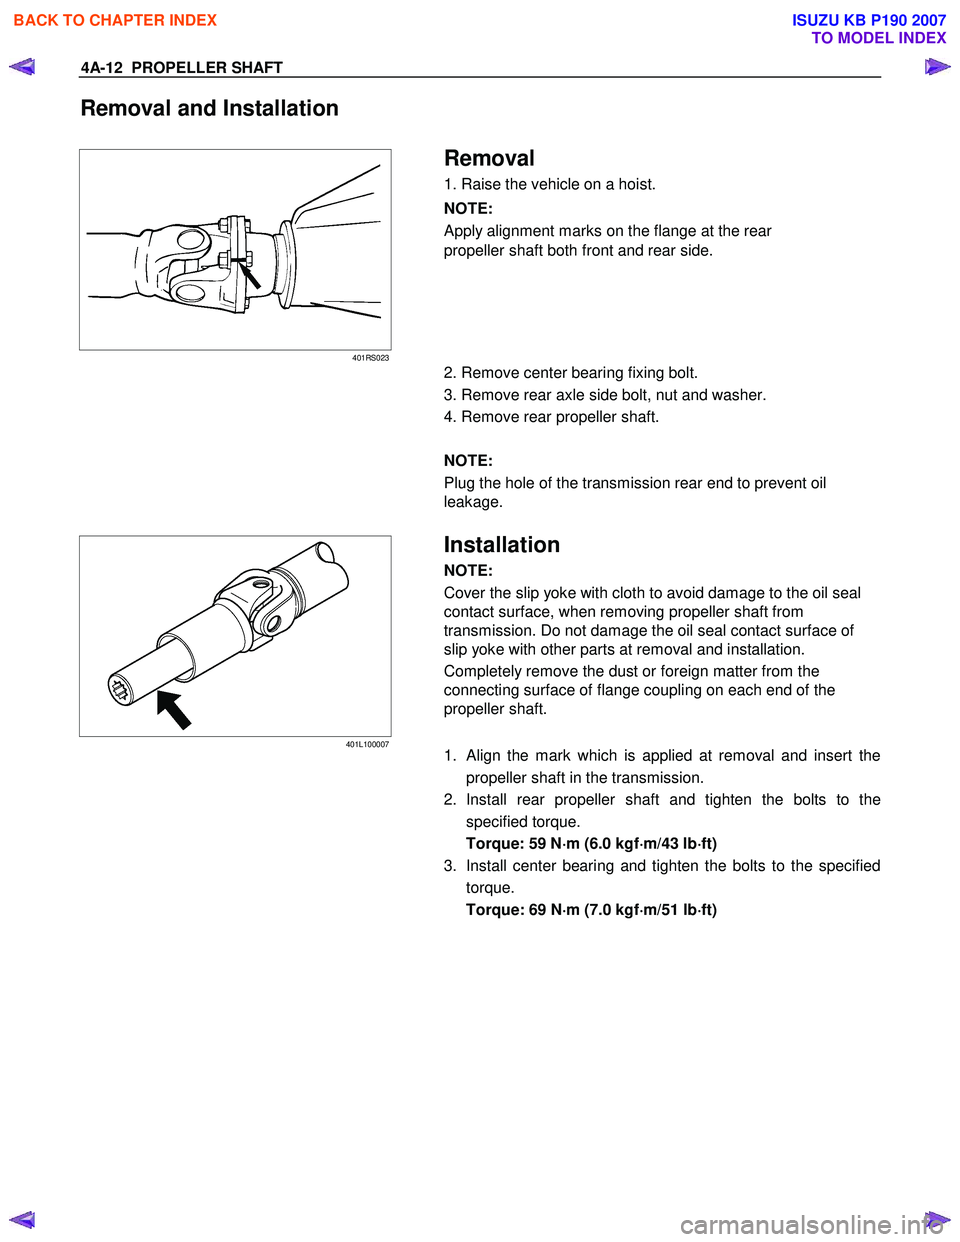 ISUZU KB P190 2007  Workshop User Guide 4A-12  PROPELLER SHAFT 
Removal and Installation  
 
401RS023 
 Removal 
1. Raise the vehicle on a hoist.  
NOTE:  
Apply alignment marks on the flange at the rear  
propeller shaft both front and rea